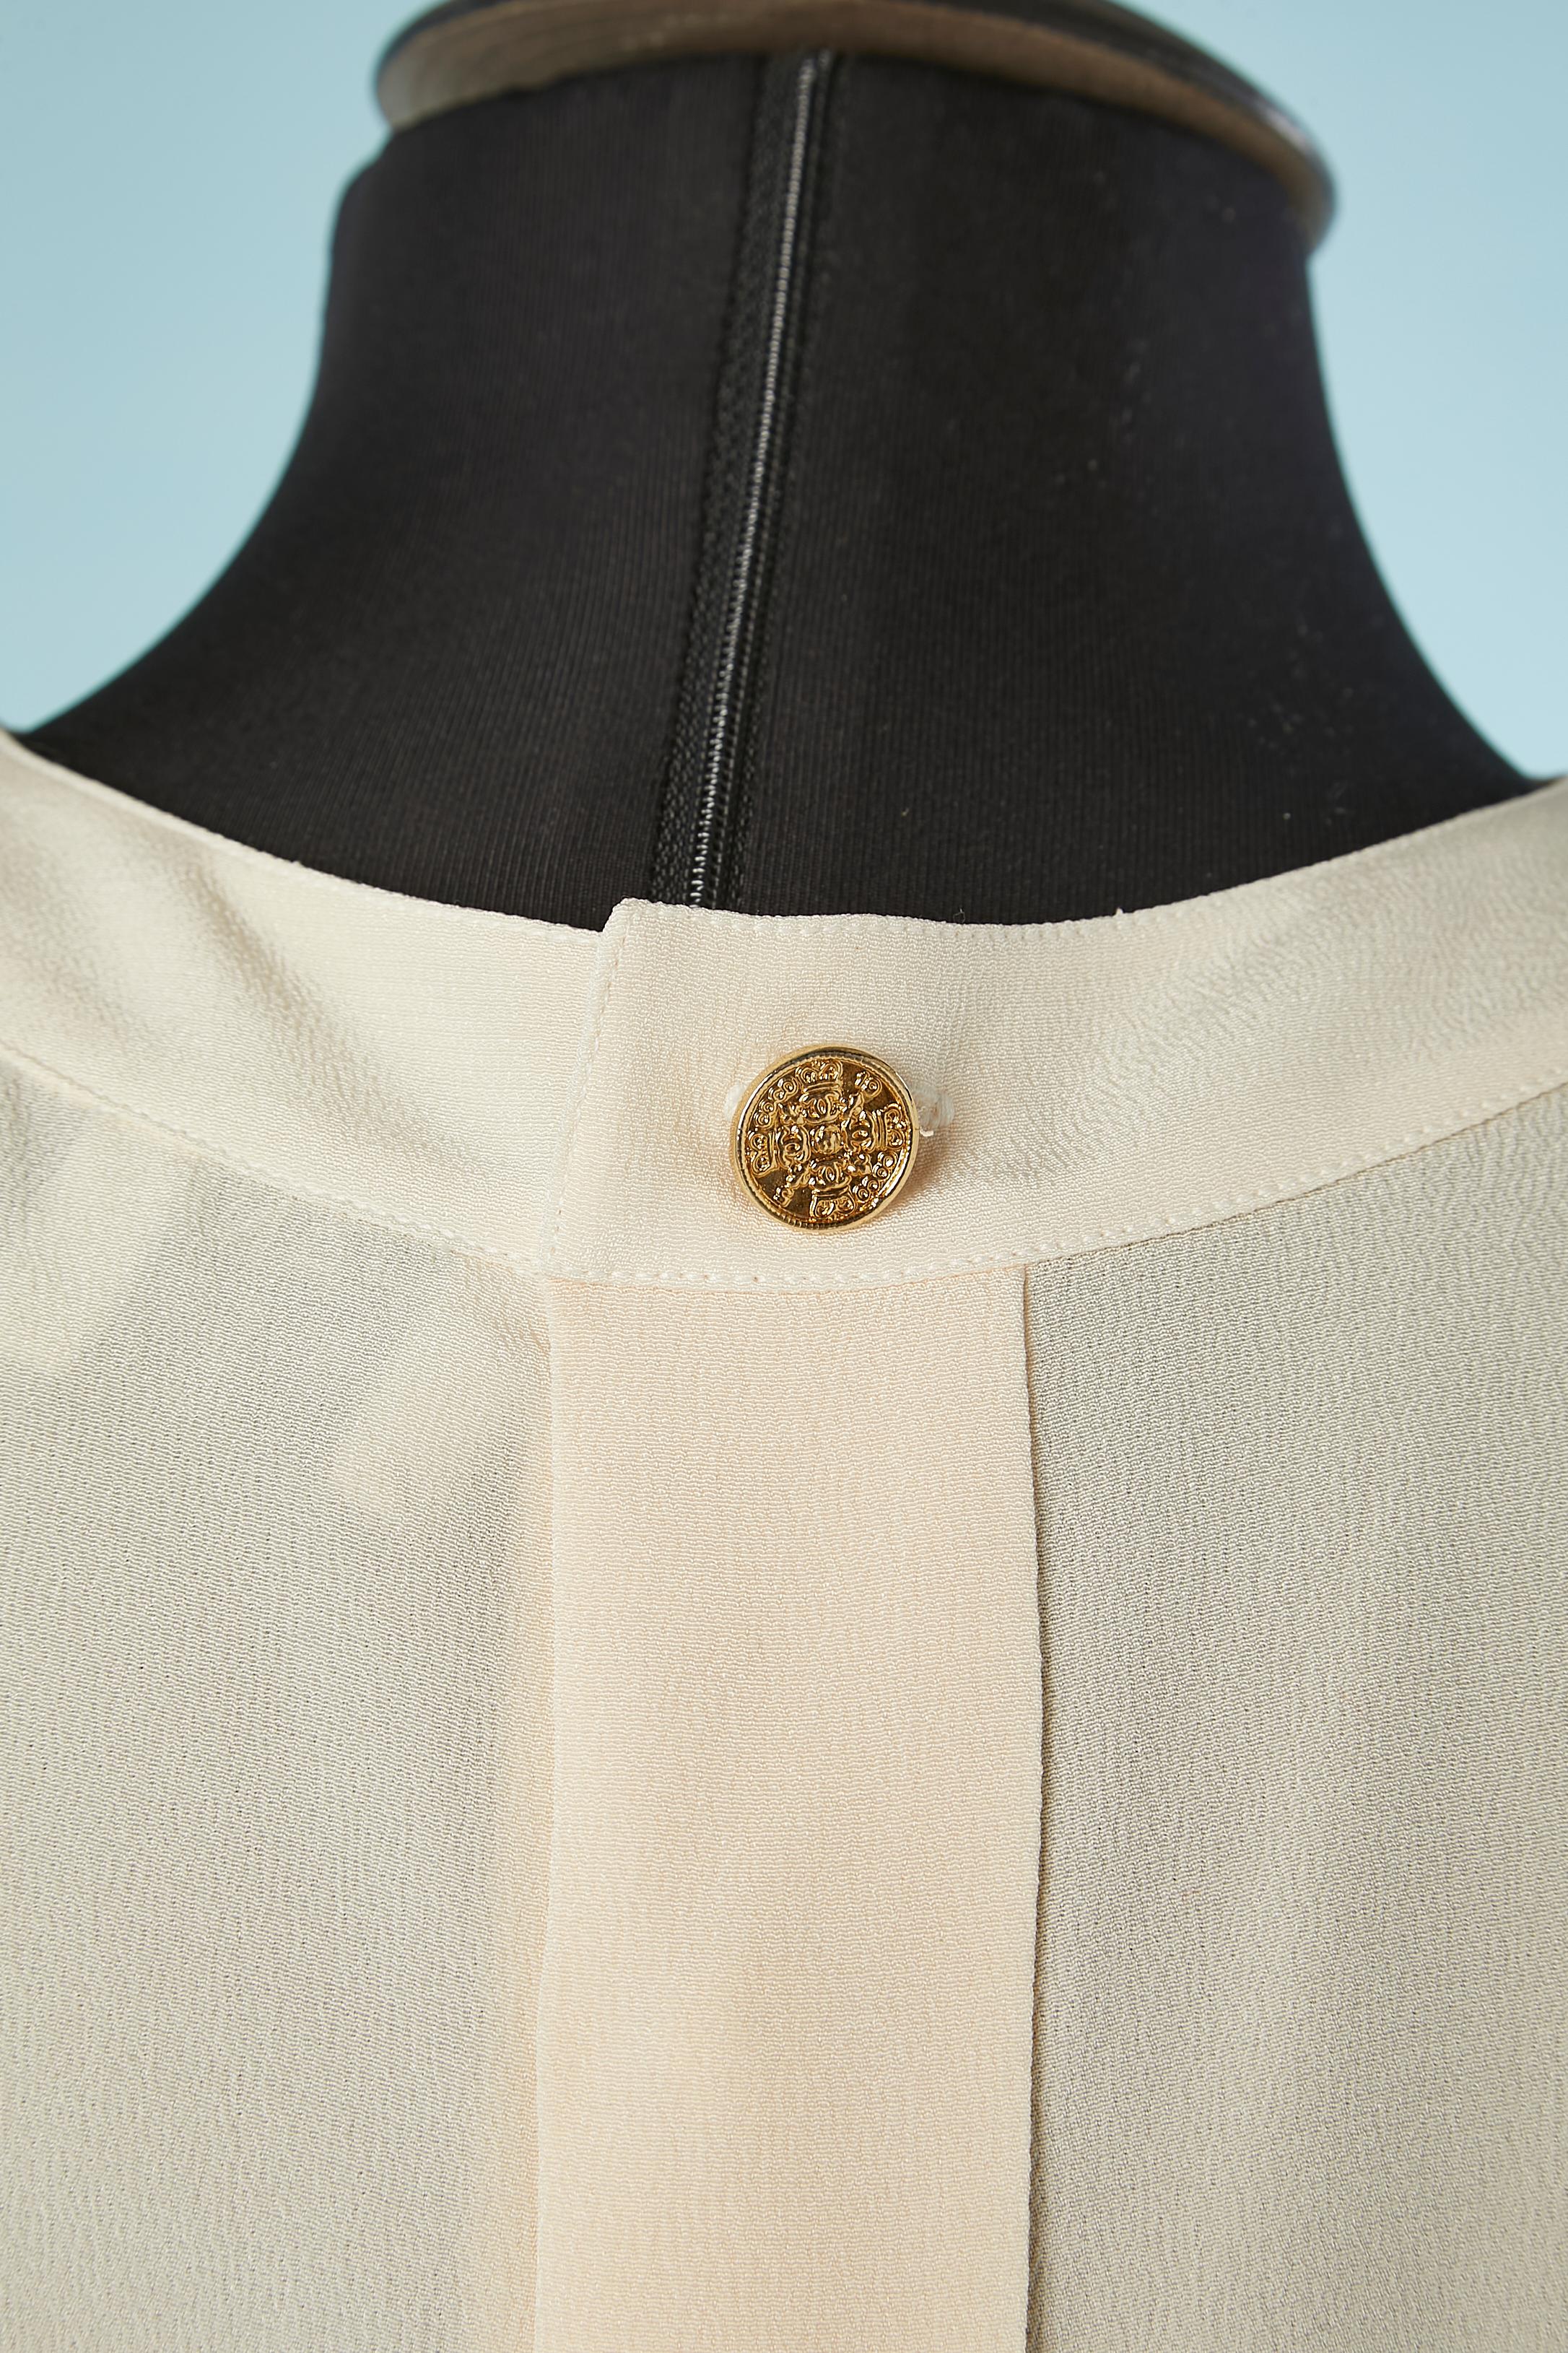 Women's Sleeveless ivory top with buttons in the middle back Chanel Boutique  For Sale